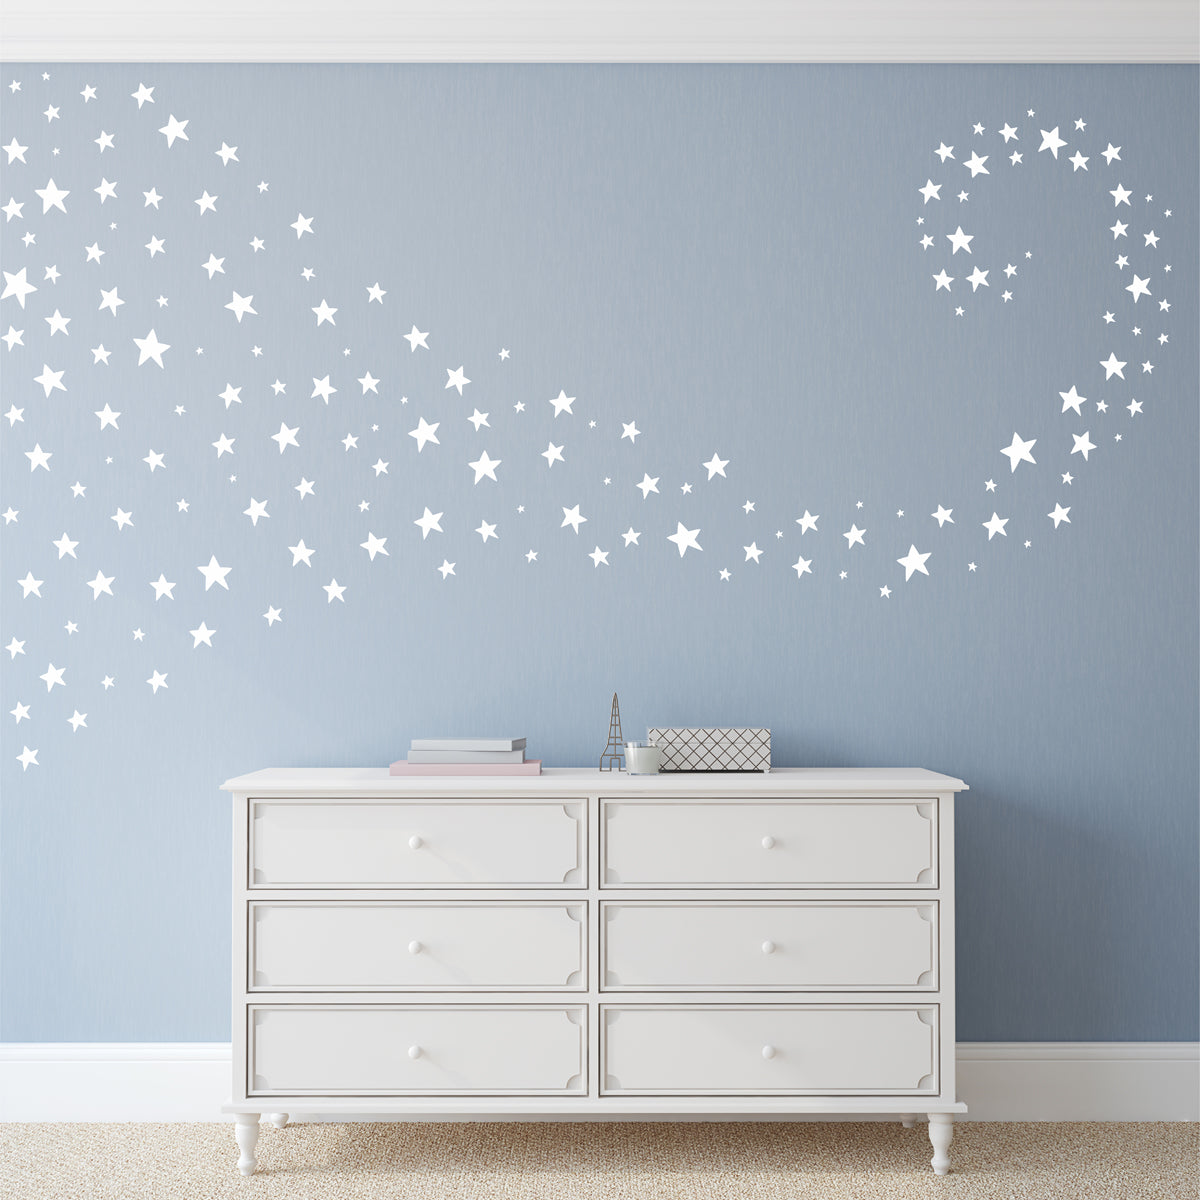 Whimsical Star Stickers